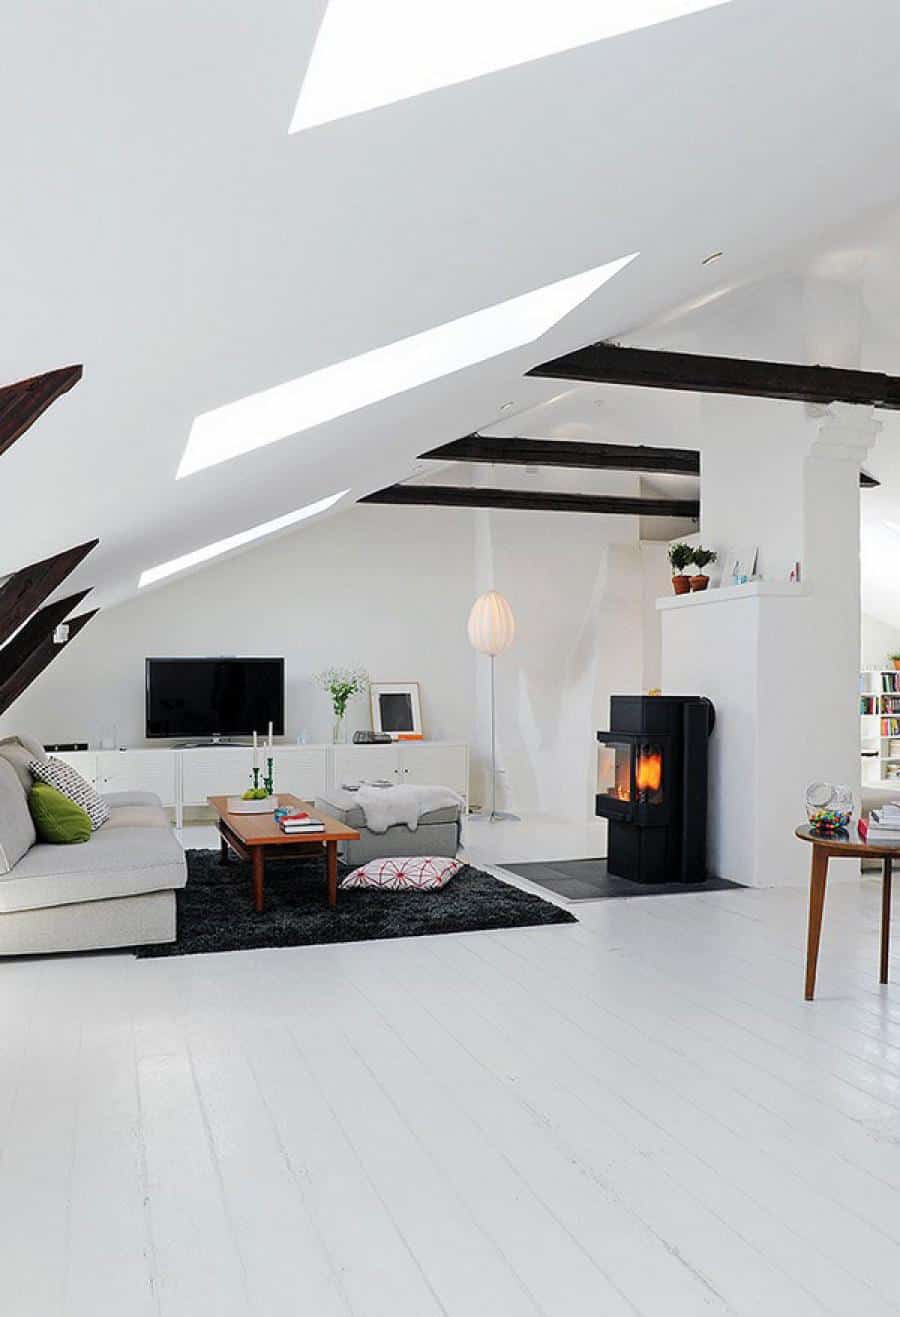 interior large attic bedroom ideas white interior with living room and simple sloping also black white furniture interior design stunning sloping wood roof attic bedroom design